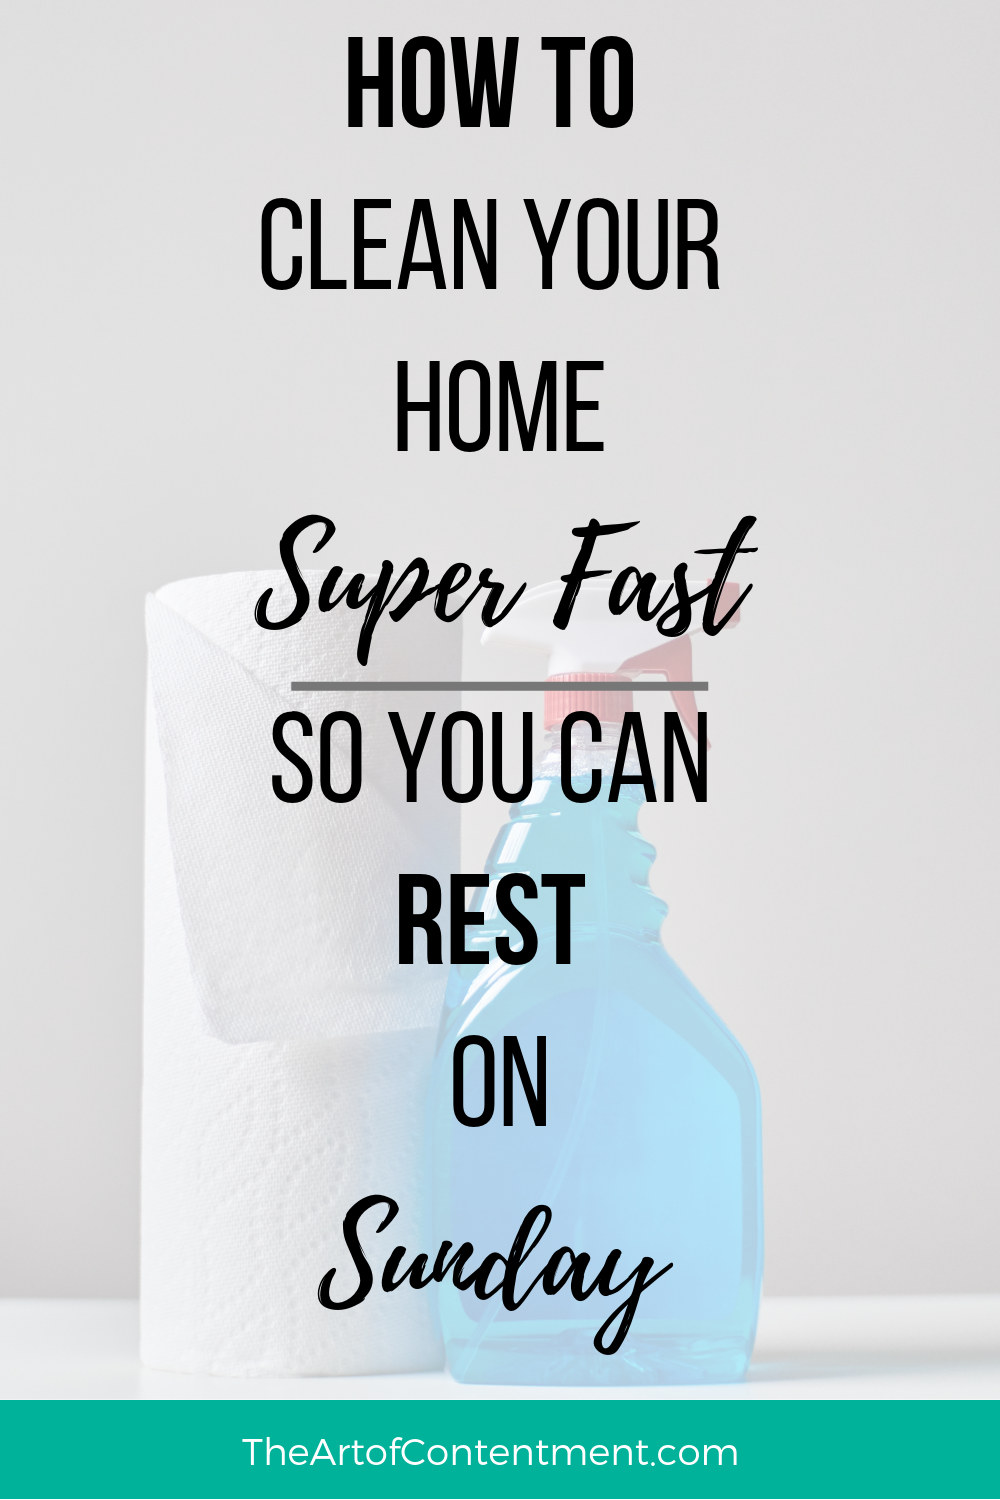 Are you so busy cleaning you can't possibly relax and do NOTHING on Sunday? Try these tips to clean your home super fast so you can get it all done and rest on Sunday.